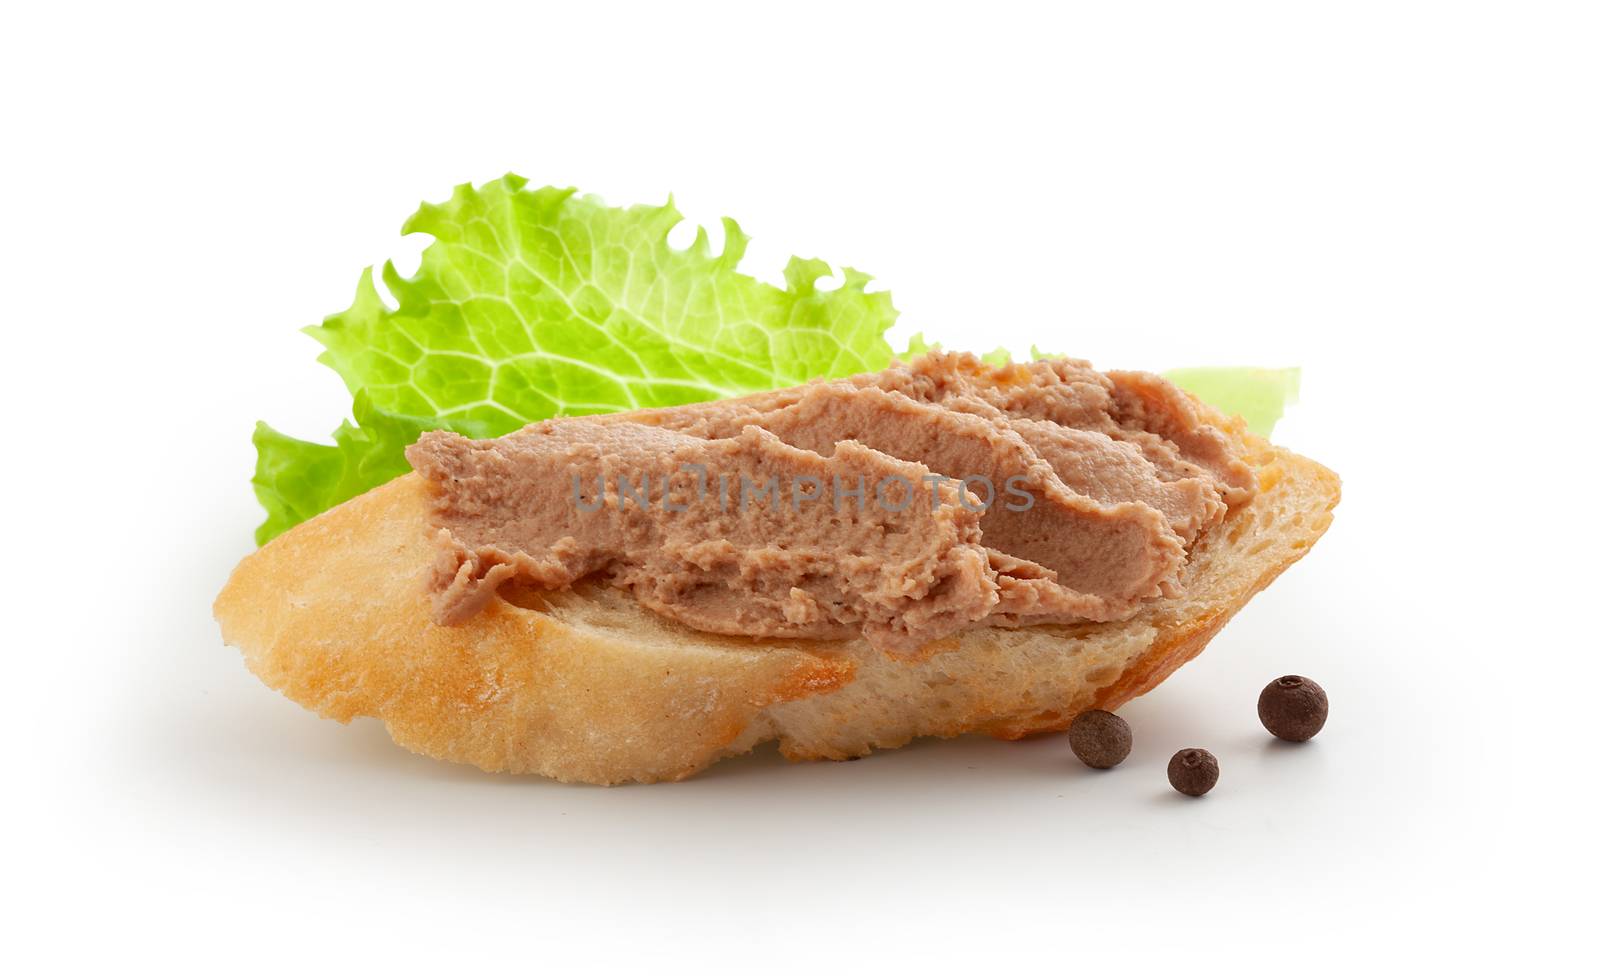 Sandwich with meat pate by Angorius